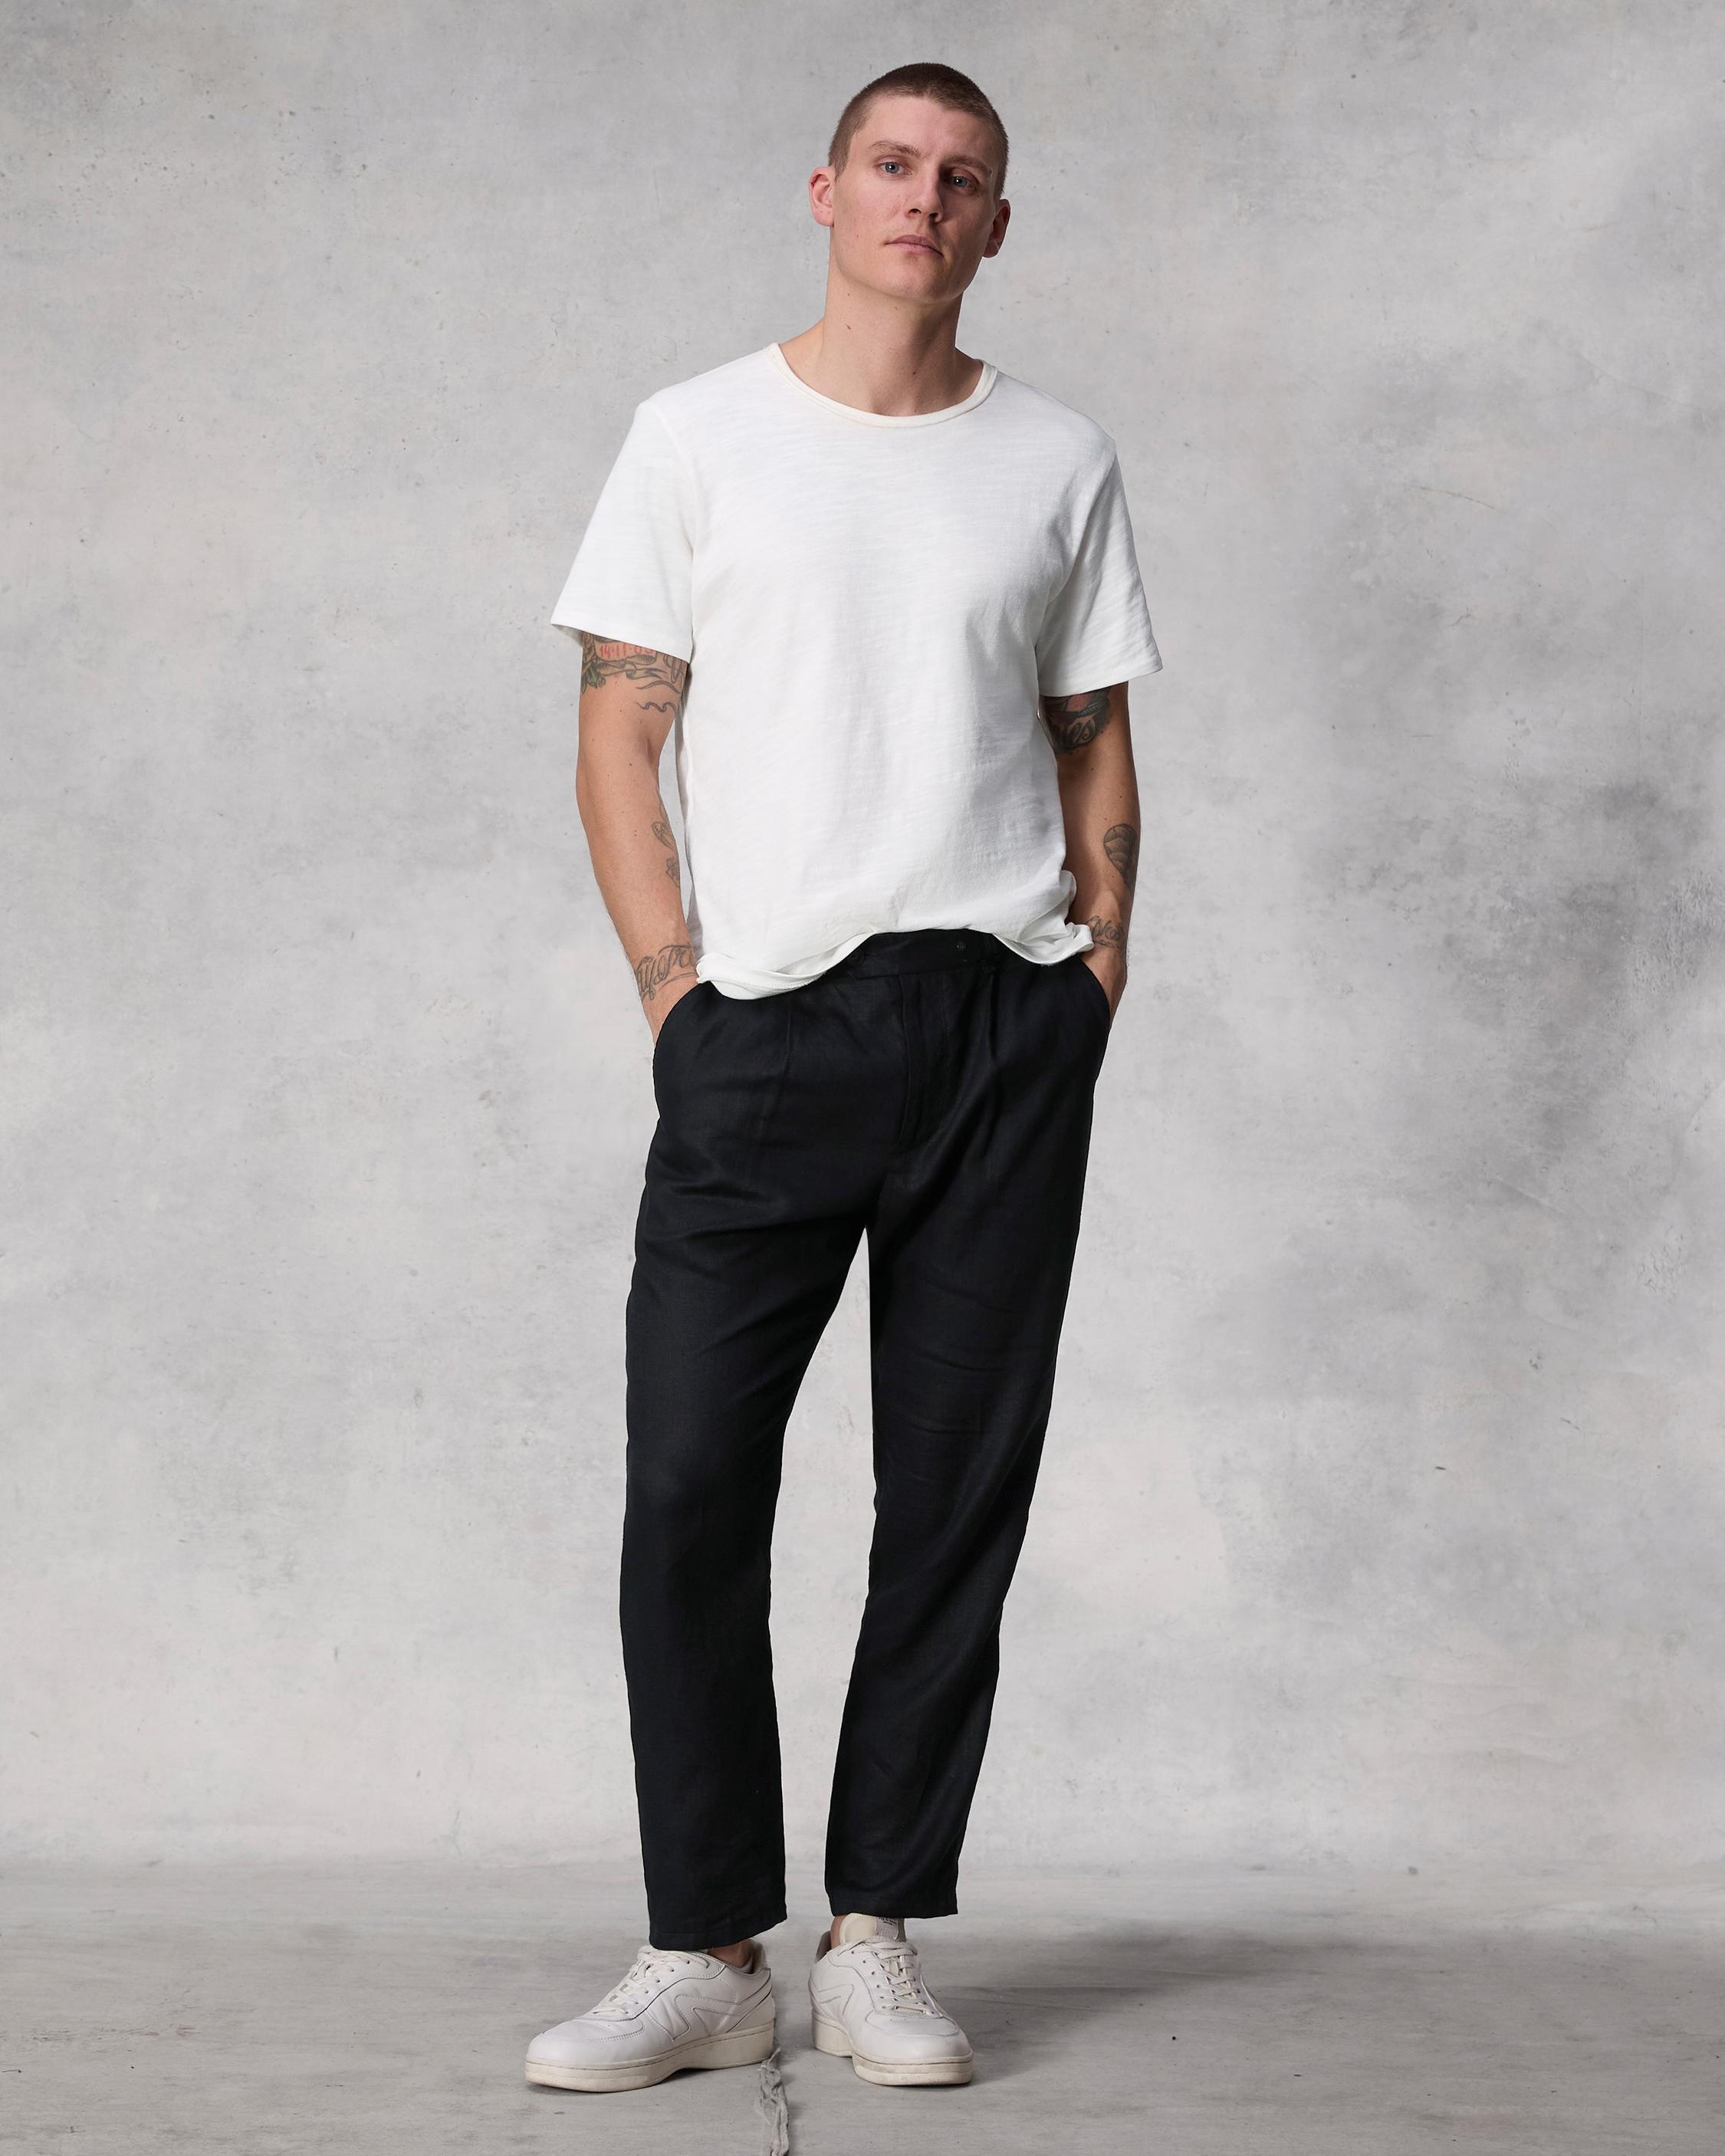 Pleated Linen Chino
Slim Fit - 3